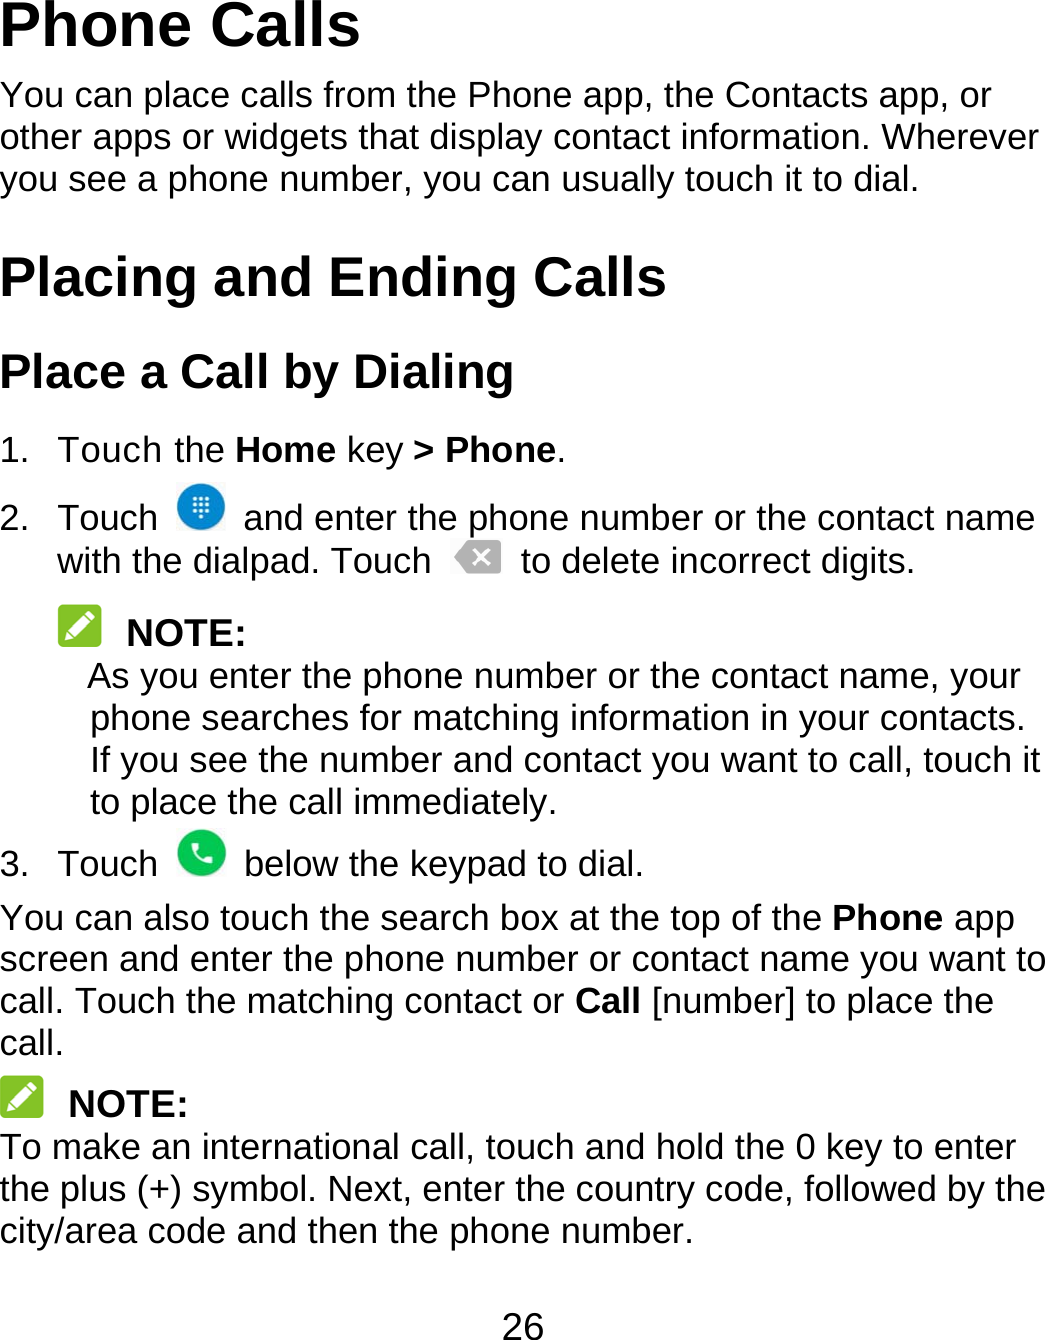 26 Phone Calls You can place calls from the Phone app, the Contacts app, or other apps or widgets that display contact information. Wherever you see a phone number, you can usually touch it to dial. Placing and Ending Calls Place a Call by Dialing 1. Touch the Home key &gt; Phone. 2. Touch    and enter the phone number or the contact name with the dialpad. Touch    to delete incorrect digits.  NOTE: As you enter the phone number or the contact name, your phone searches for matching information in your contacts. If you see the number and contact you want to call, touch it to place the call immediately. 3. Touch    below the keypad to dial. You can also touch the search box at the top of the Phone app screen and enter the phone number or contact name you want to call. Touch the matching contact or Call [number] to place the call.  NOTE: To make an international call, touch and hold the 0 key to enter the plus (+) symbol. Next, enter the country code, followed by the city/area code and then the phone number. 